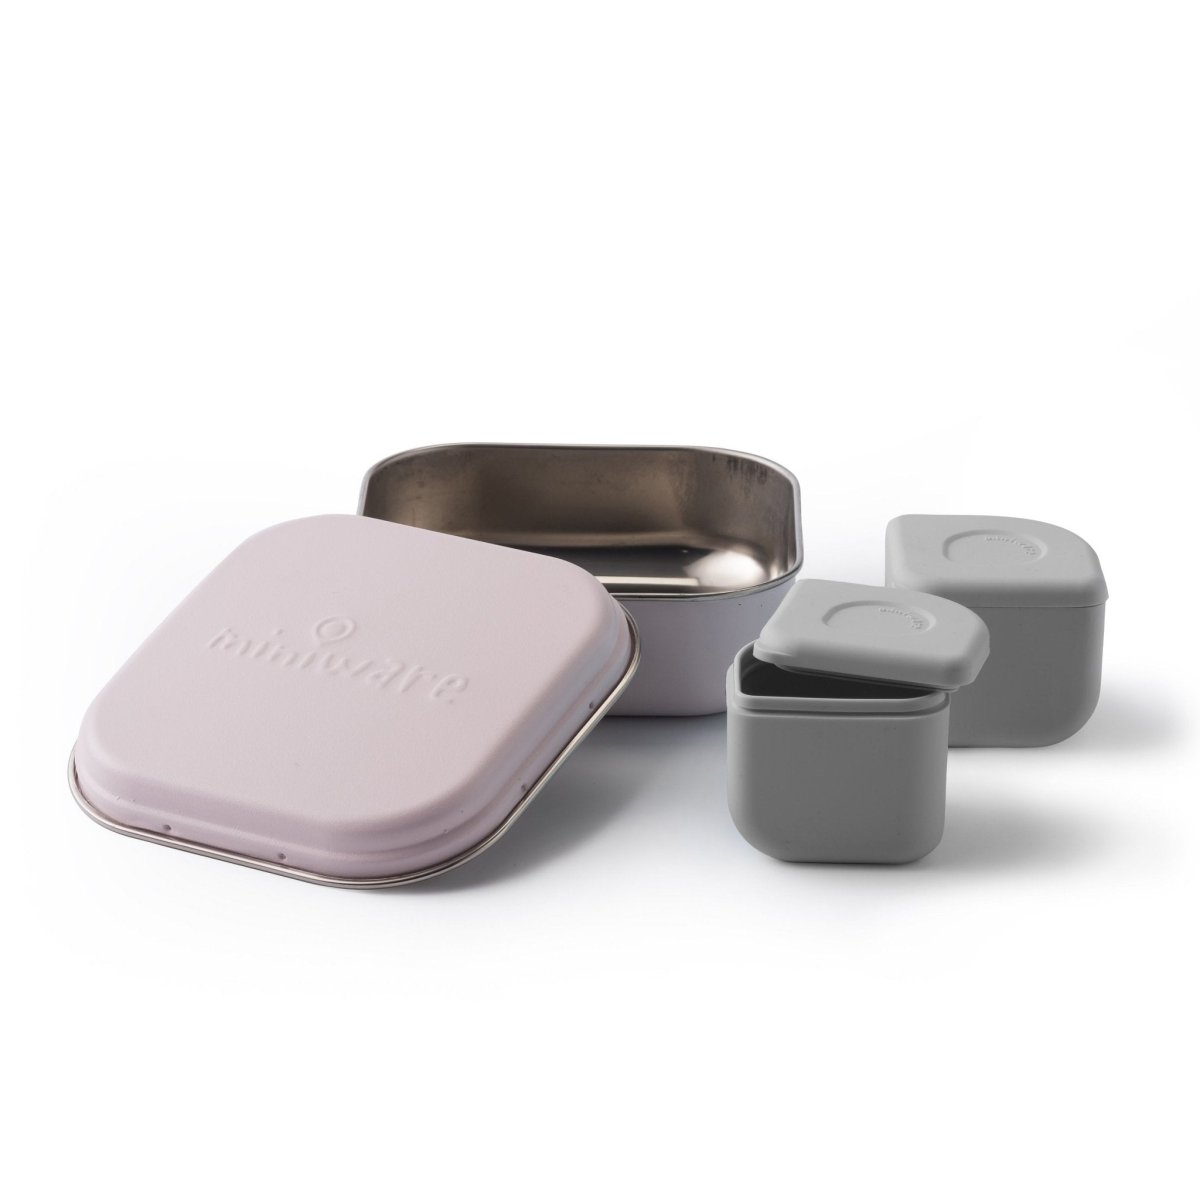 Miniware Grow Bento with 2 silipods Lunch Box- Cotton Candy+Grey - GBC2G